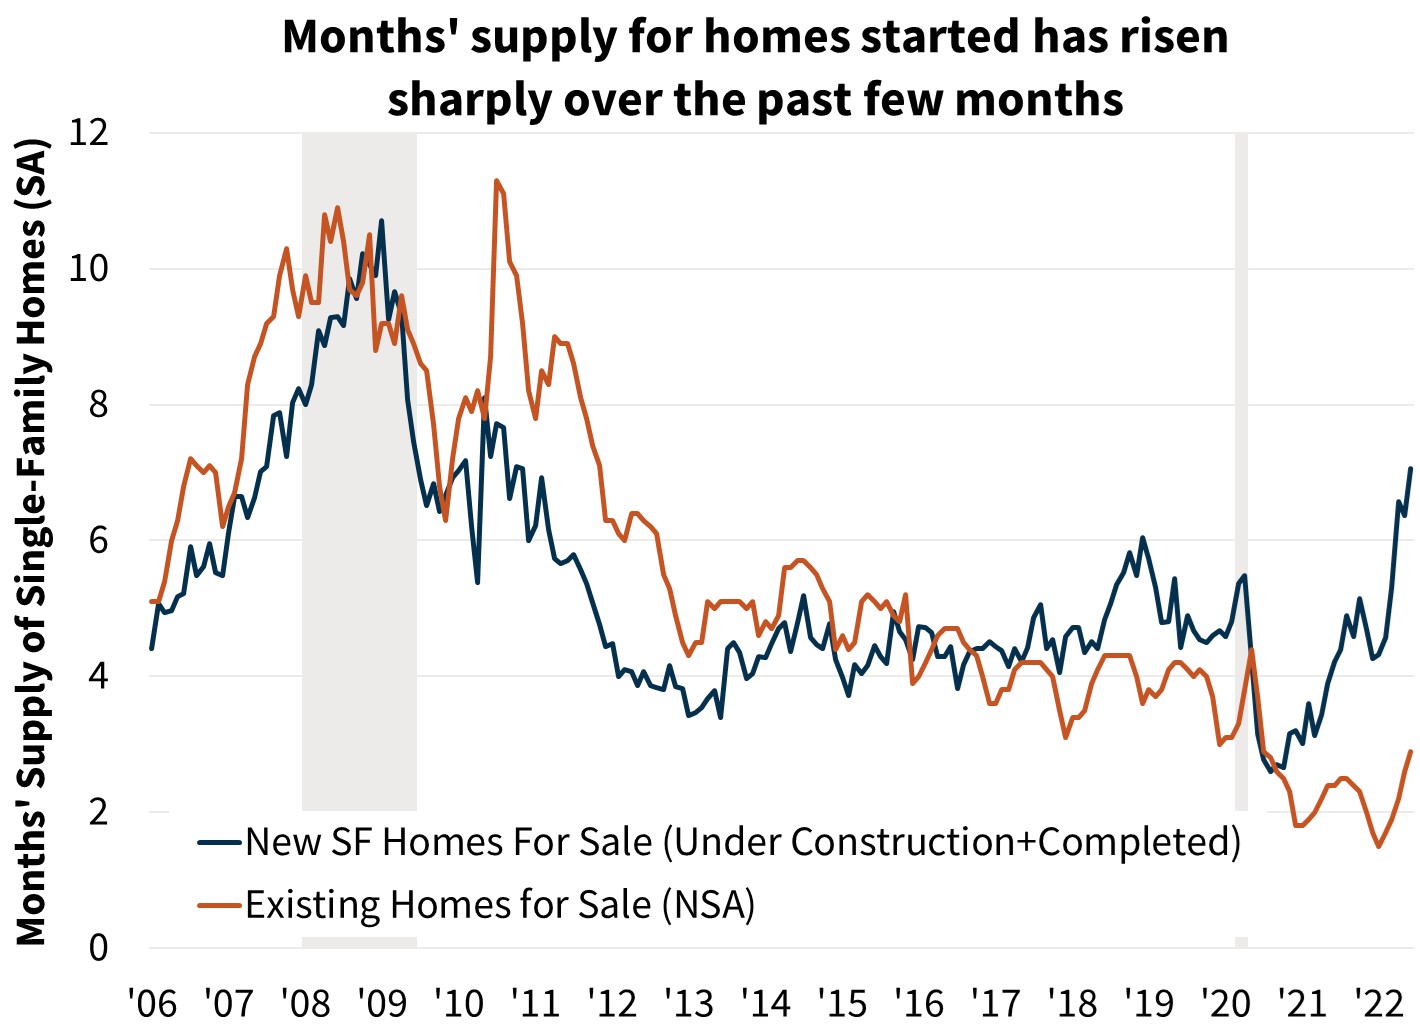  Months' supply for homes started has risen sharply over the past few months 